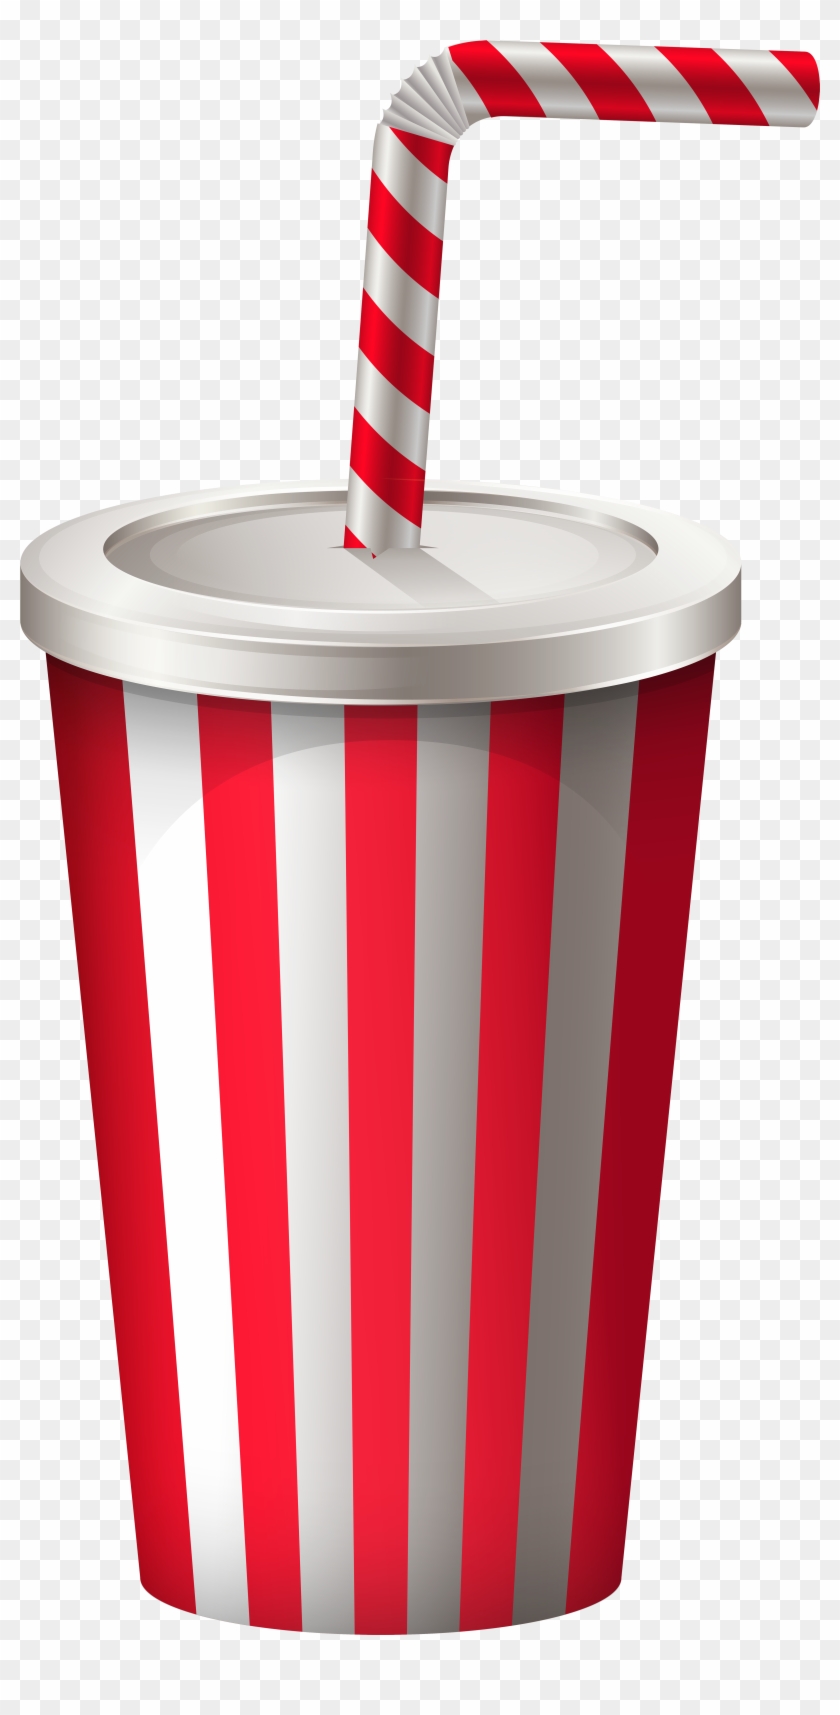 Drink Cup With Straw Png Transparent Clip Art Image - Drink With Straw Transparent #8746